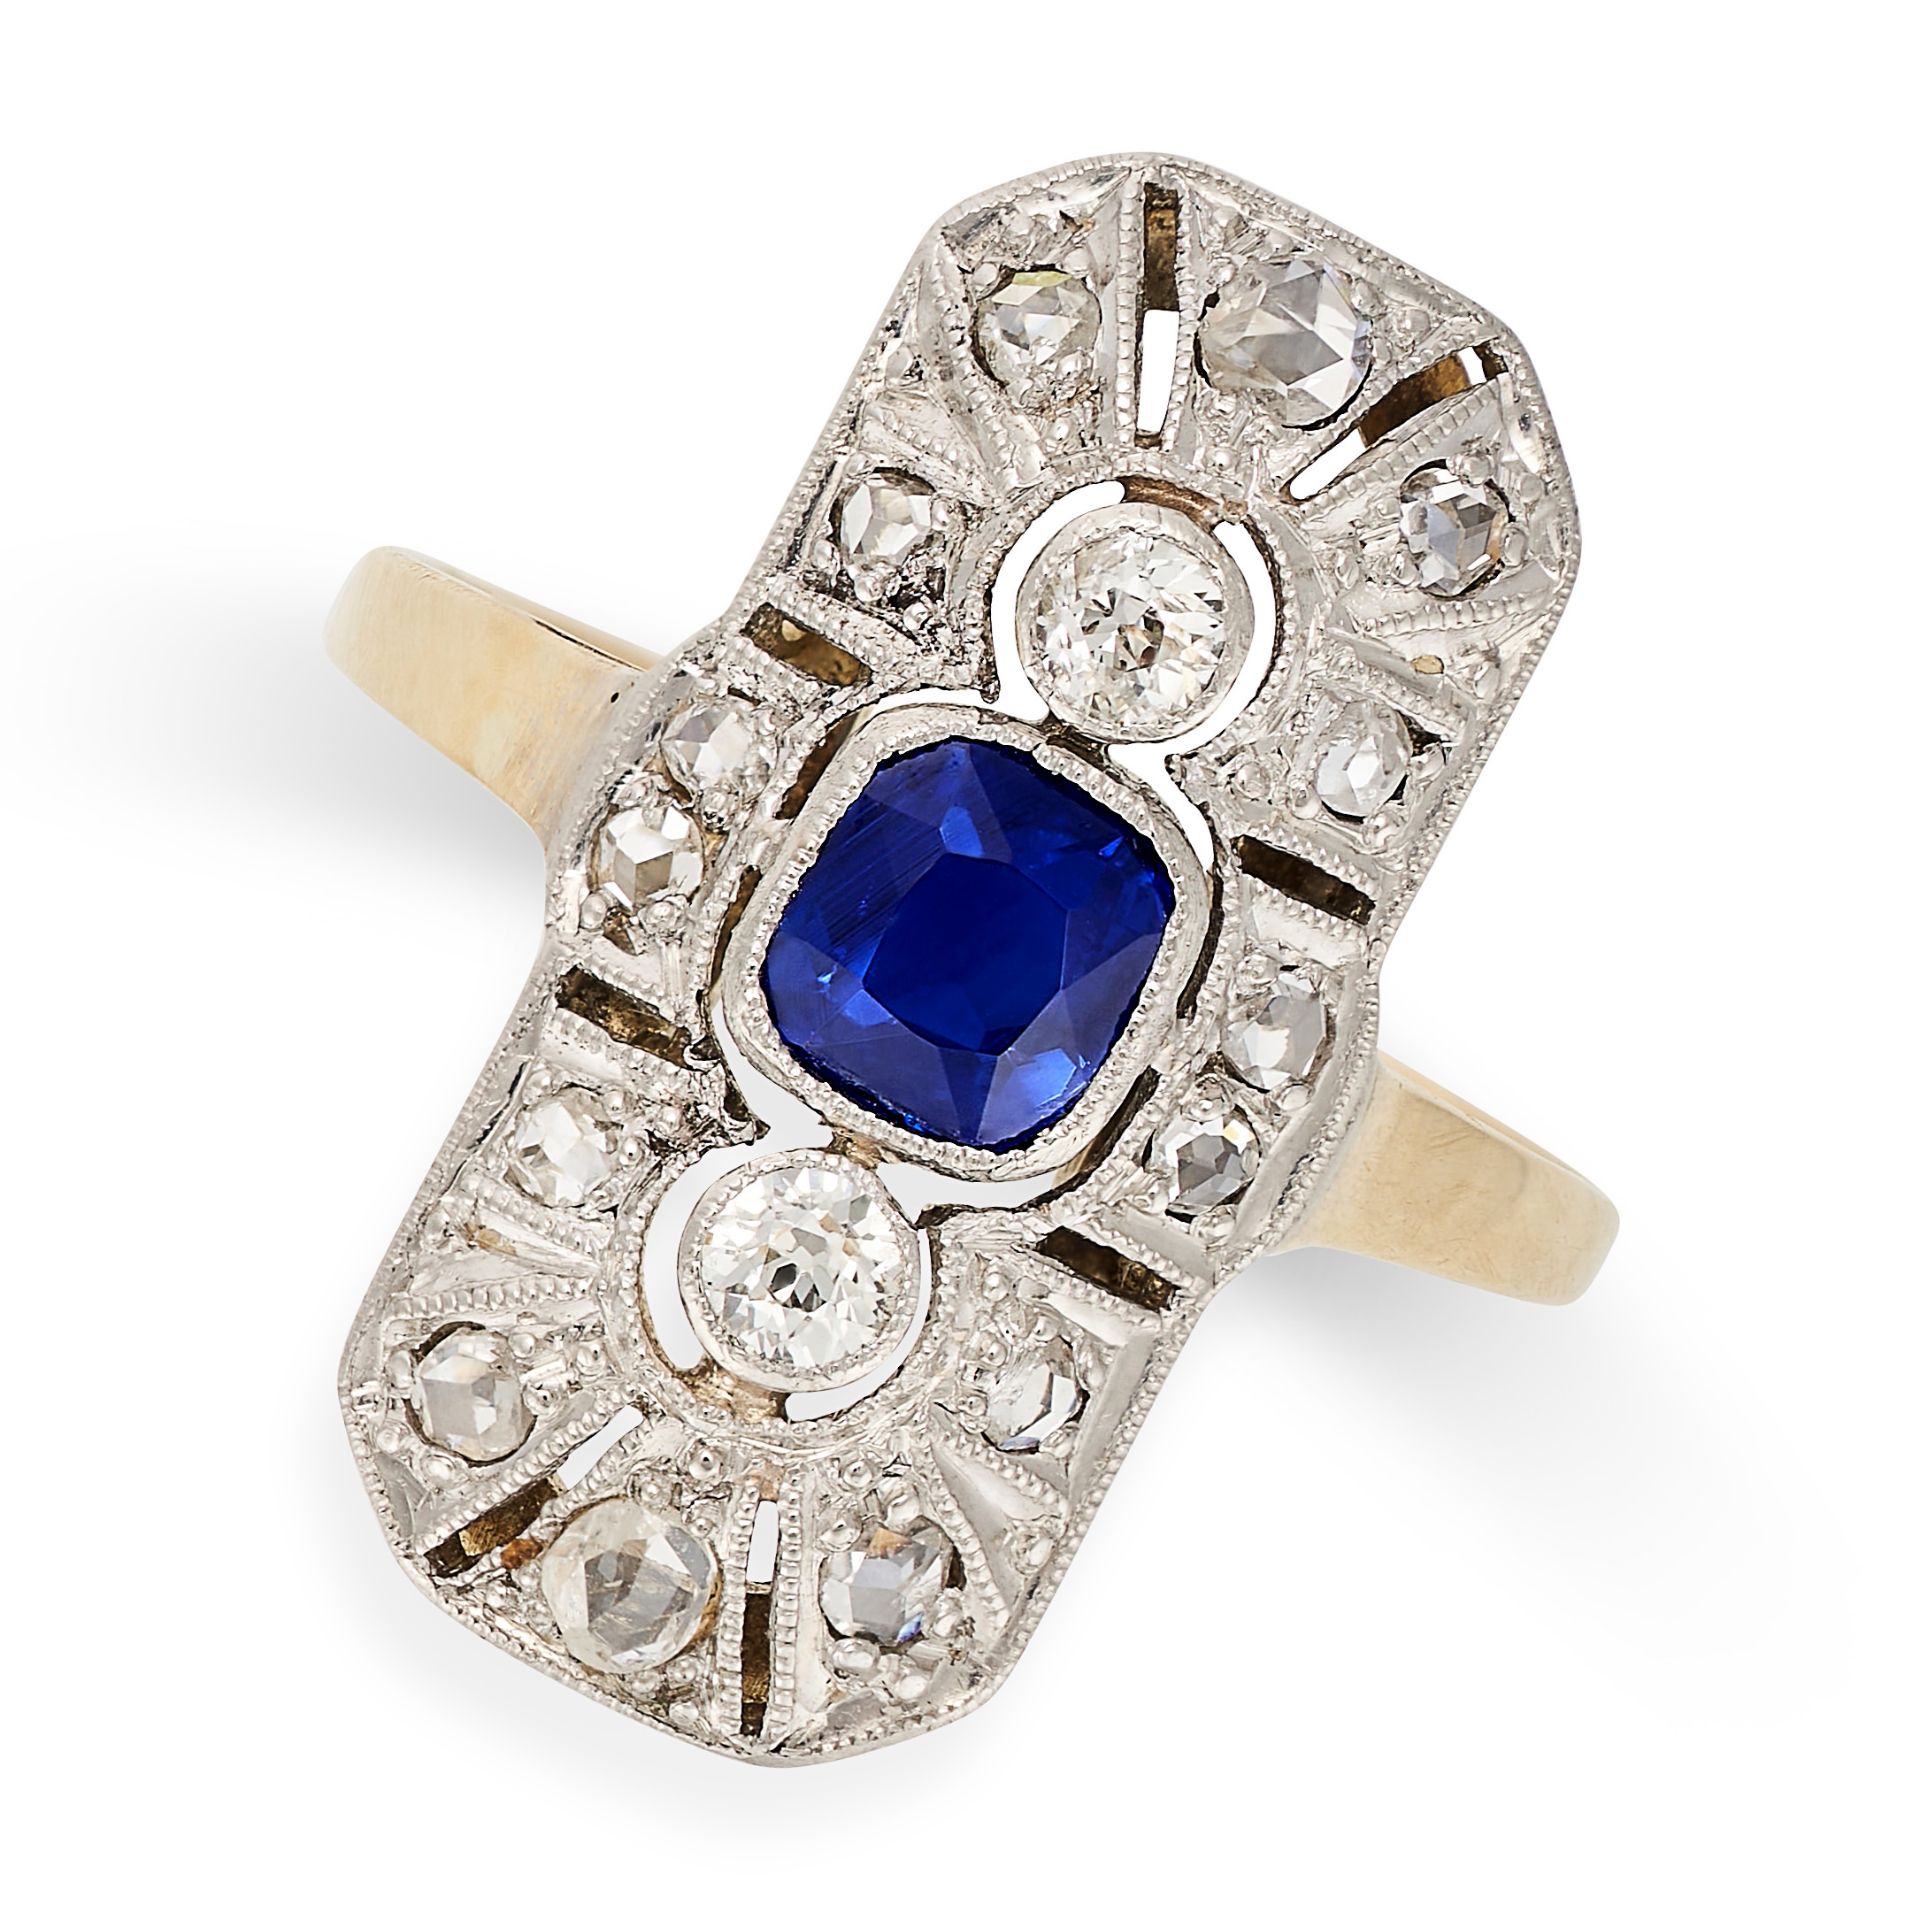 A SAPPHIRE AND DIAMOND RING in yellow gold, set with a cushion cut sapphire accented by old cut